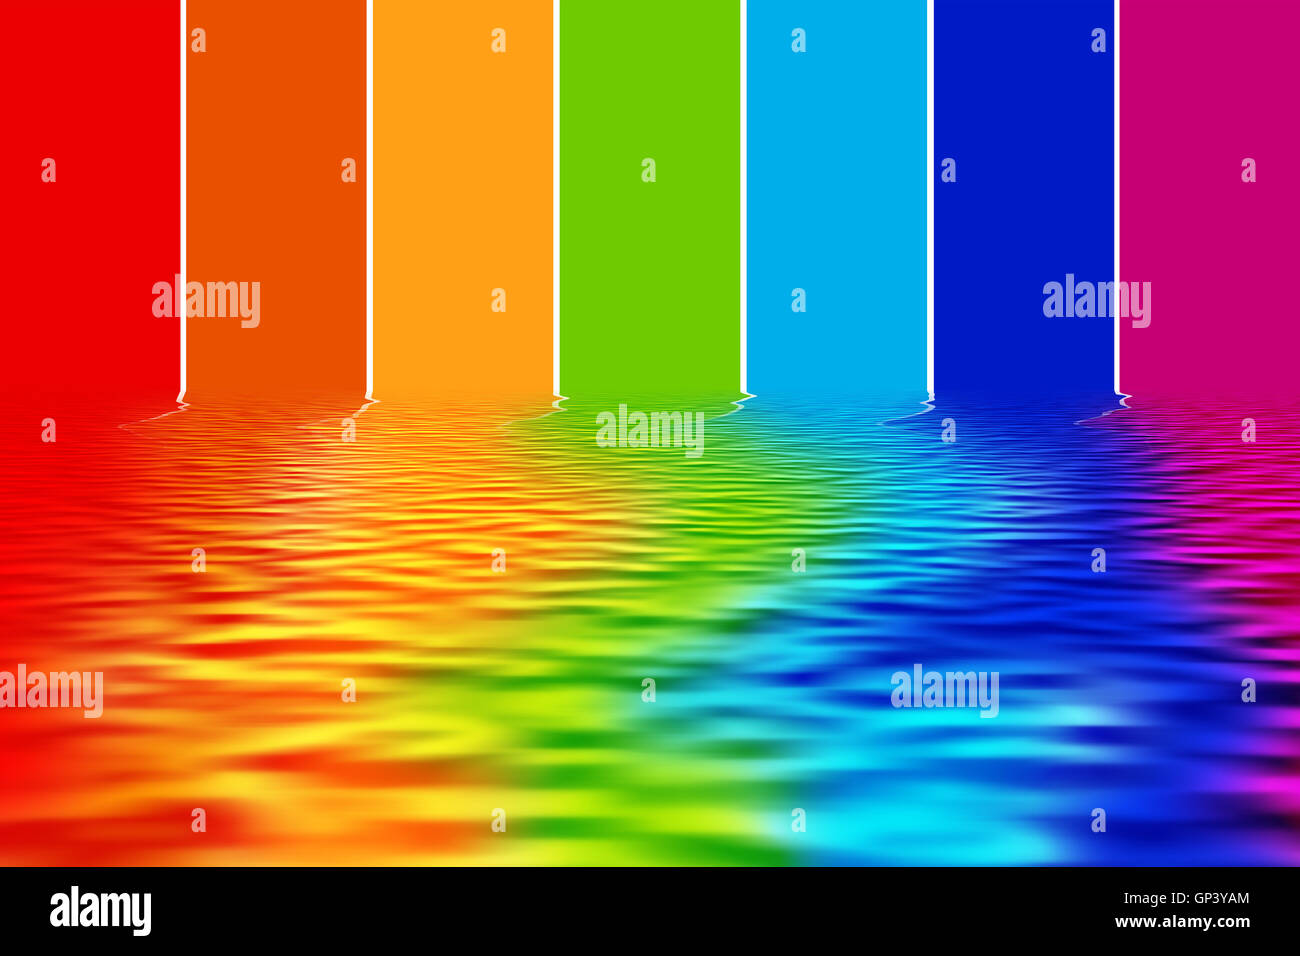 Illustration of spectrum colors reflecting on water Stock Photo